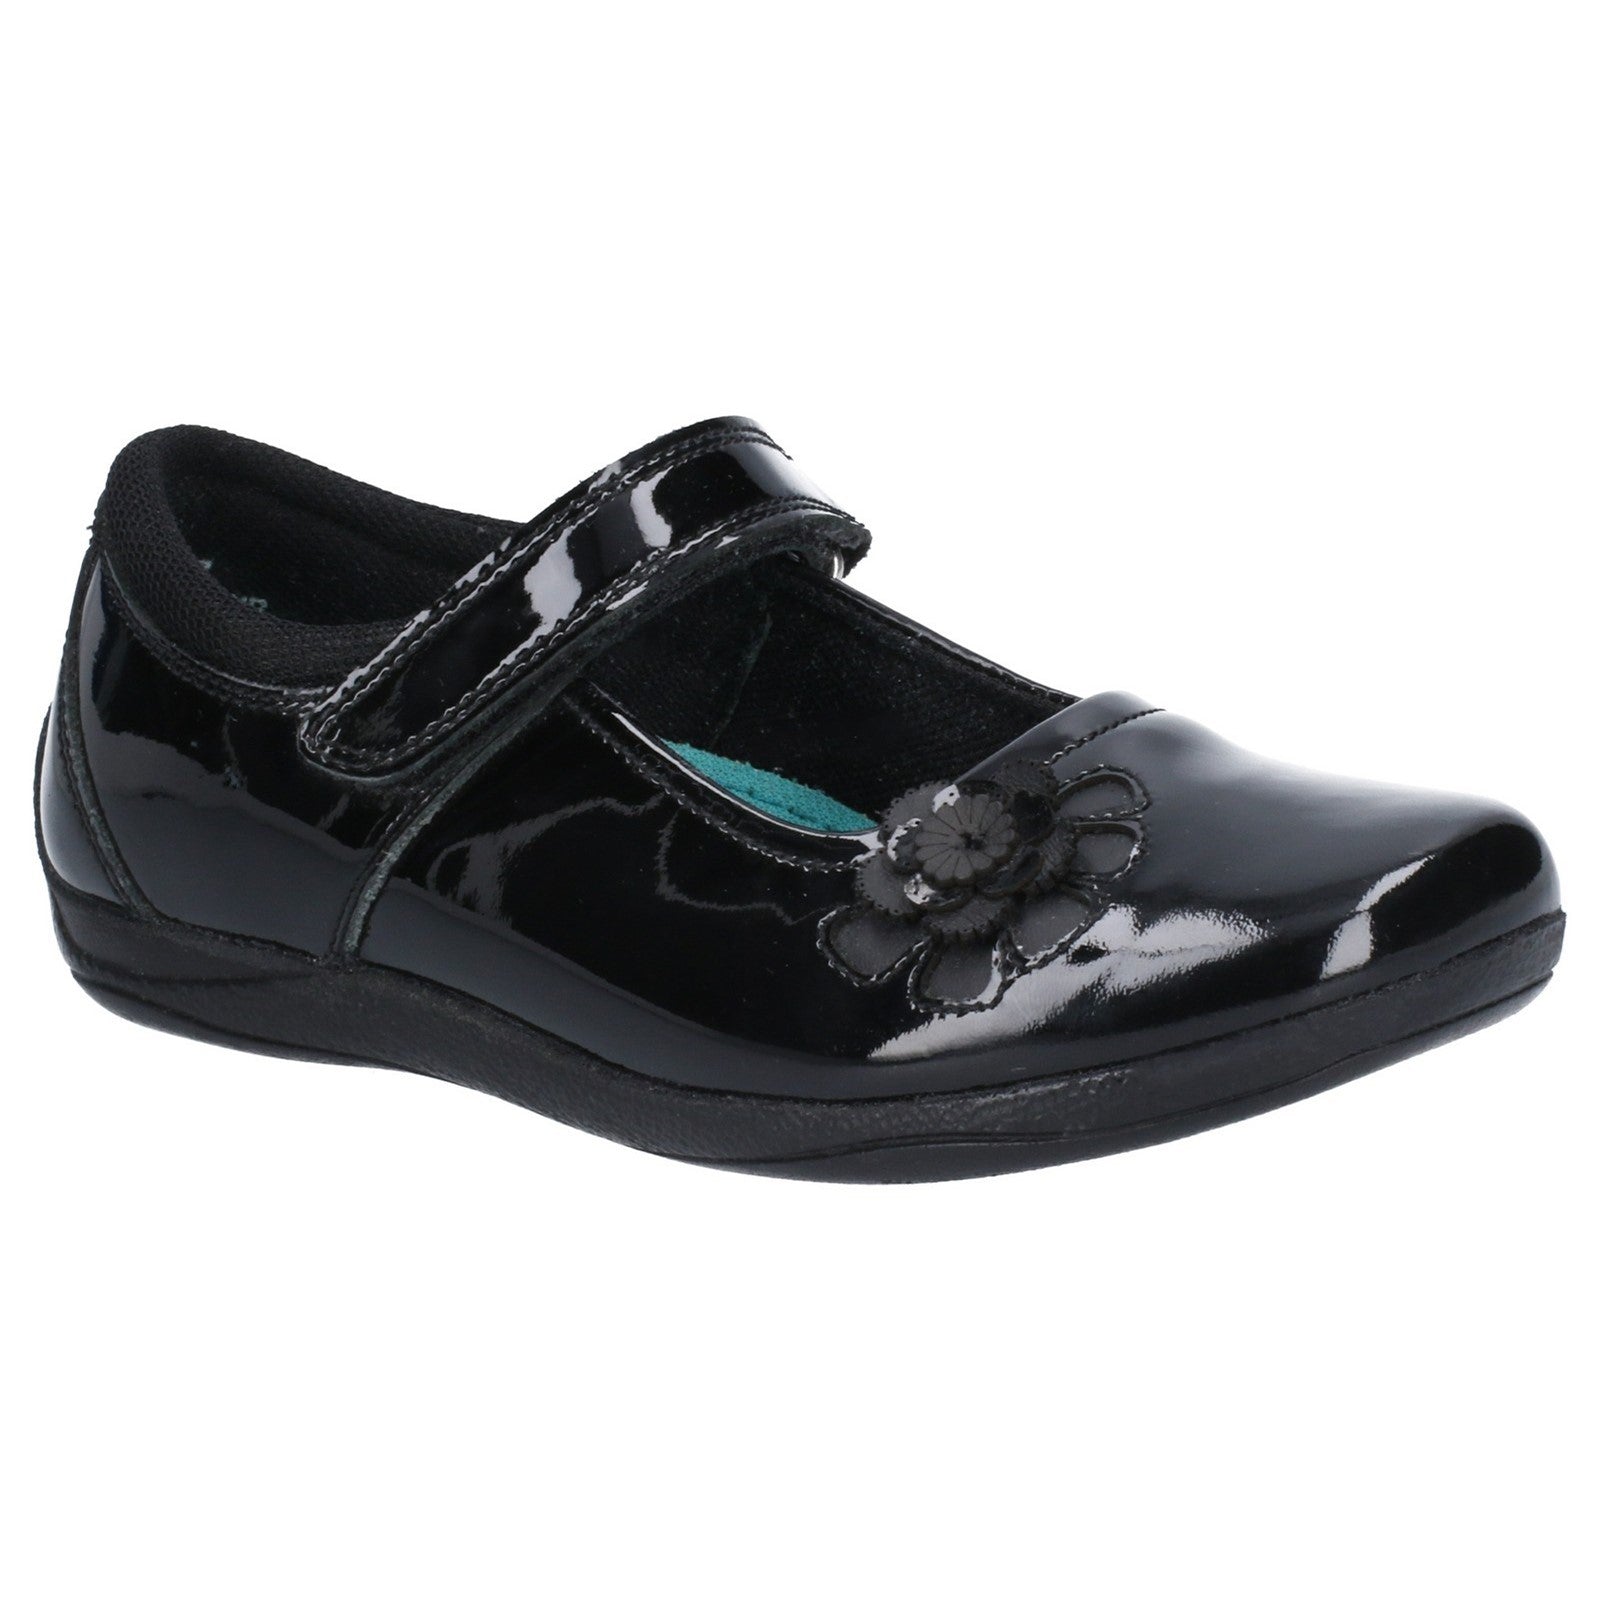 Hush Puppies Girls Jessica Patent Leather School Shoes - Black